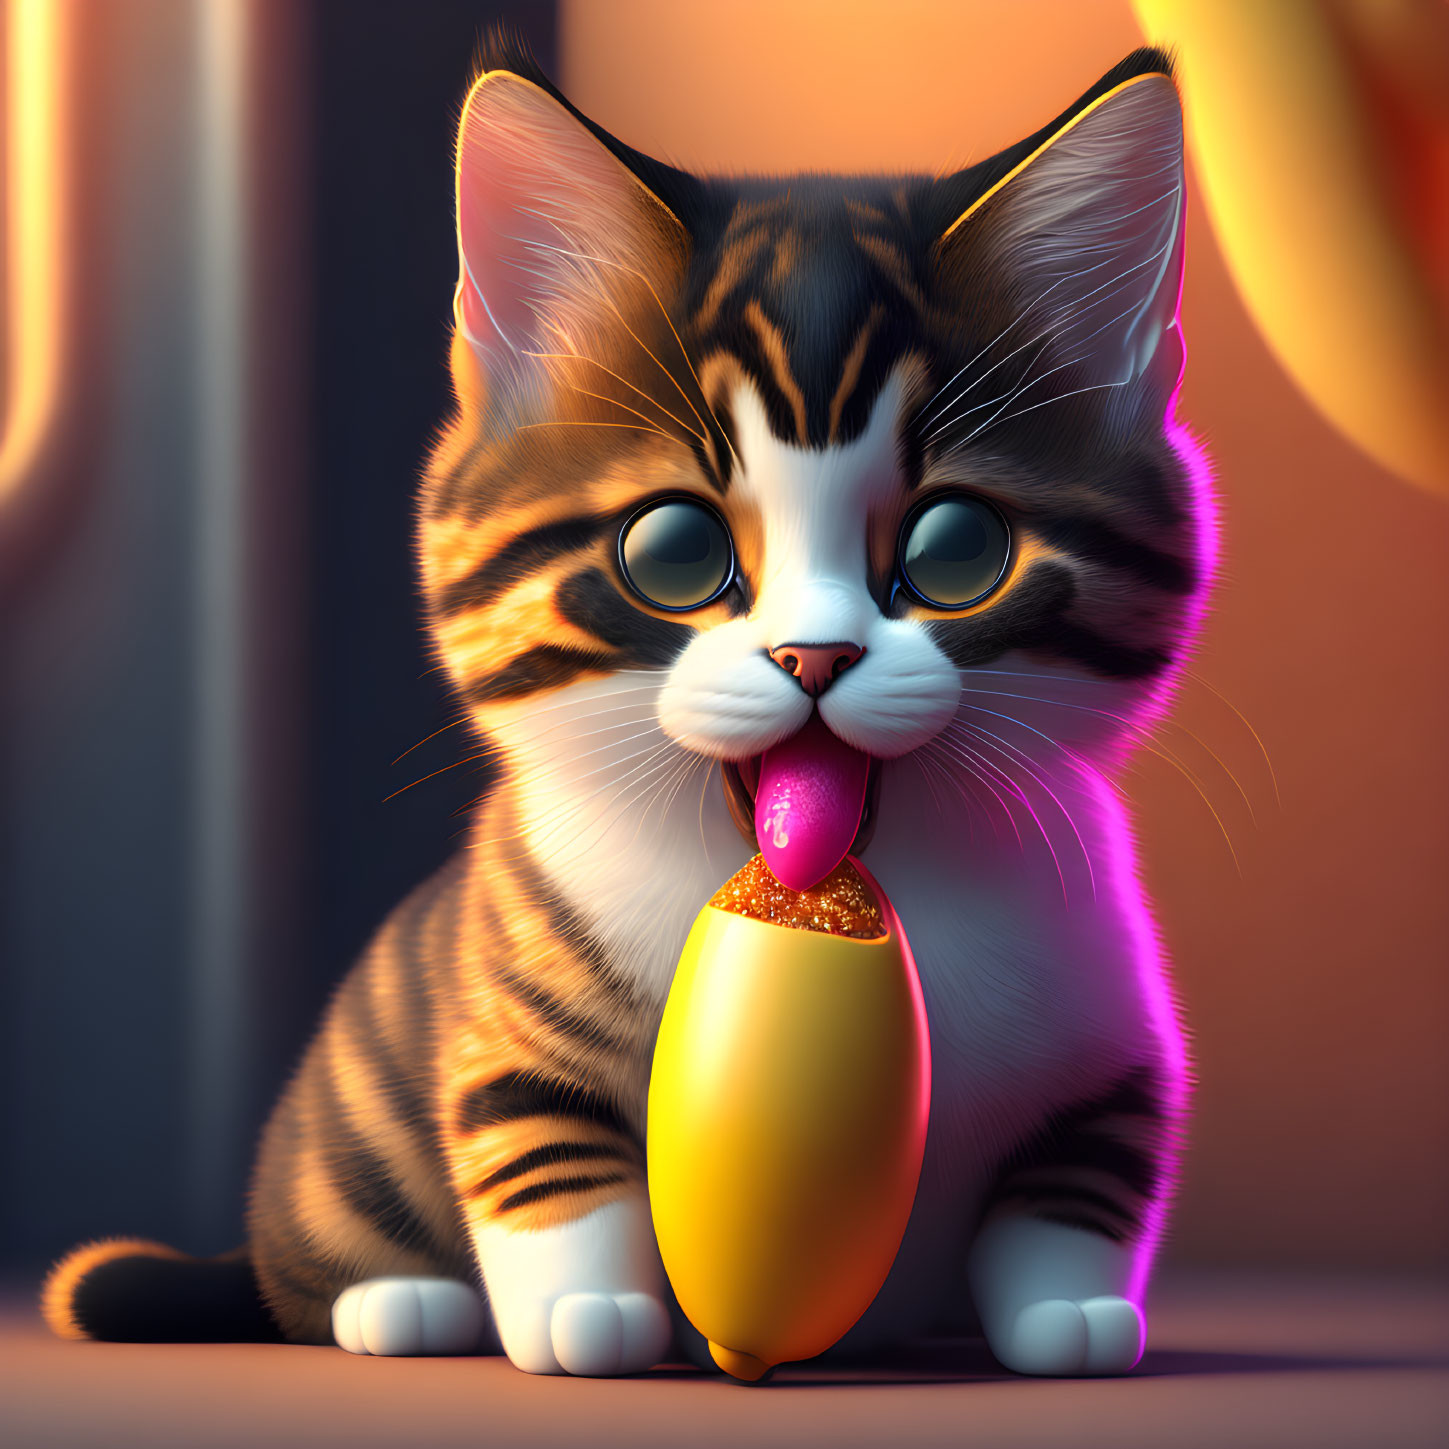 Cartoon Kitten Eating Colorful Candy in Warm Environment